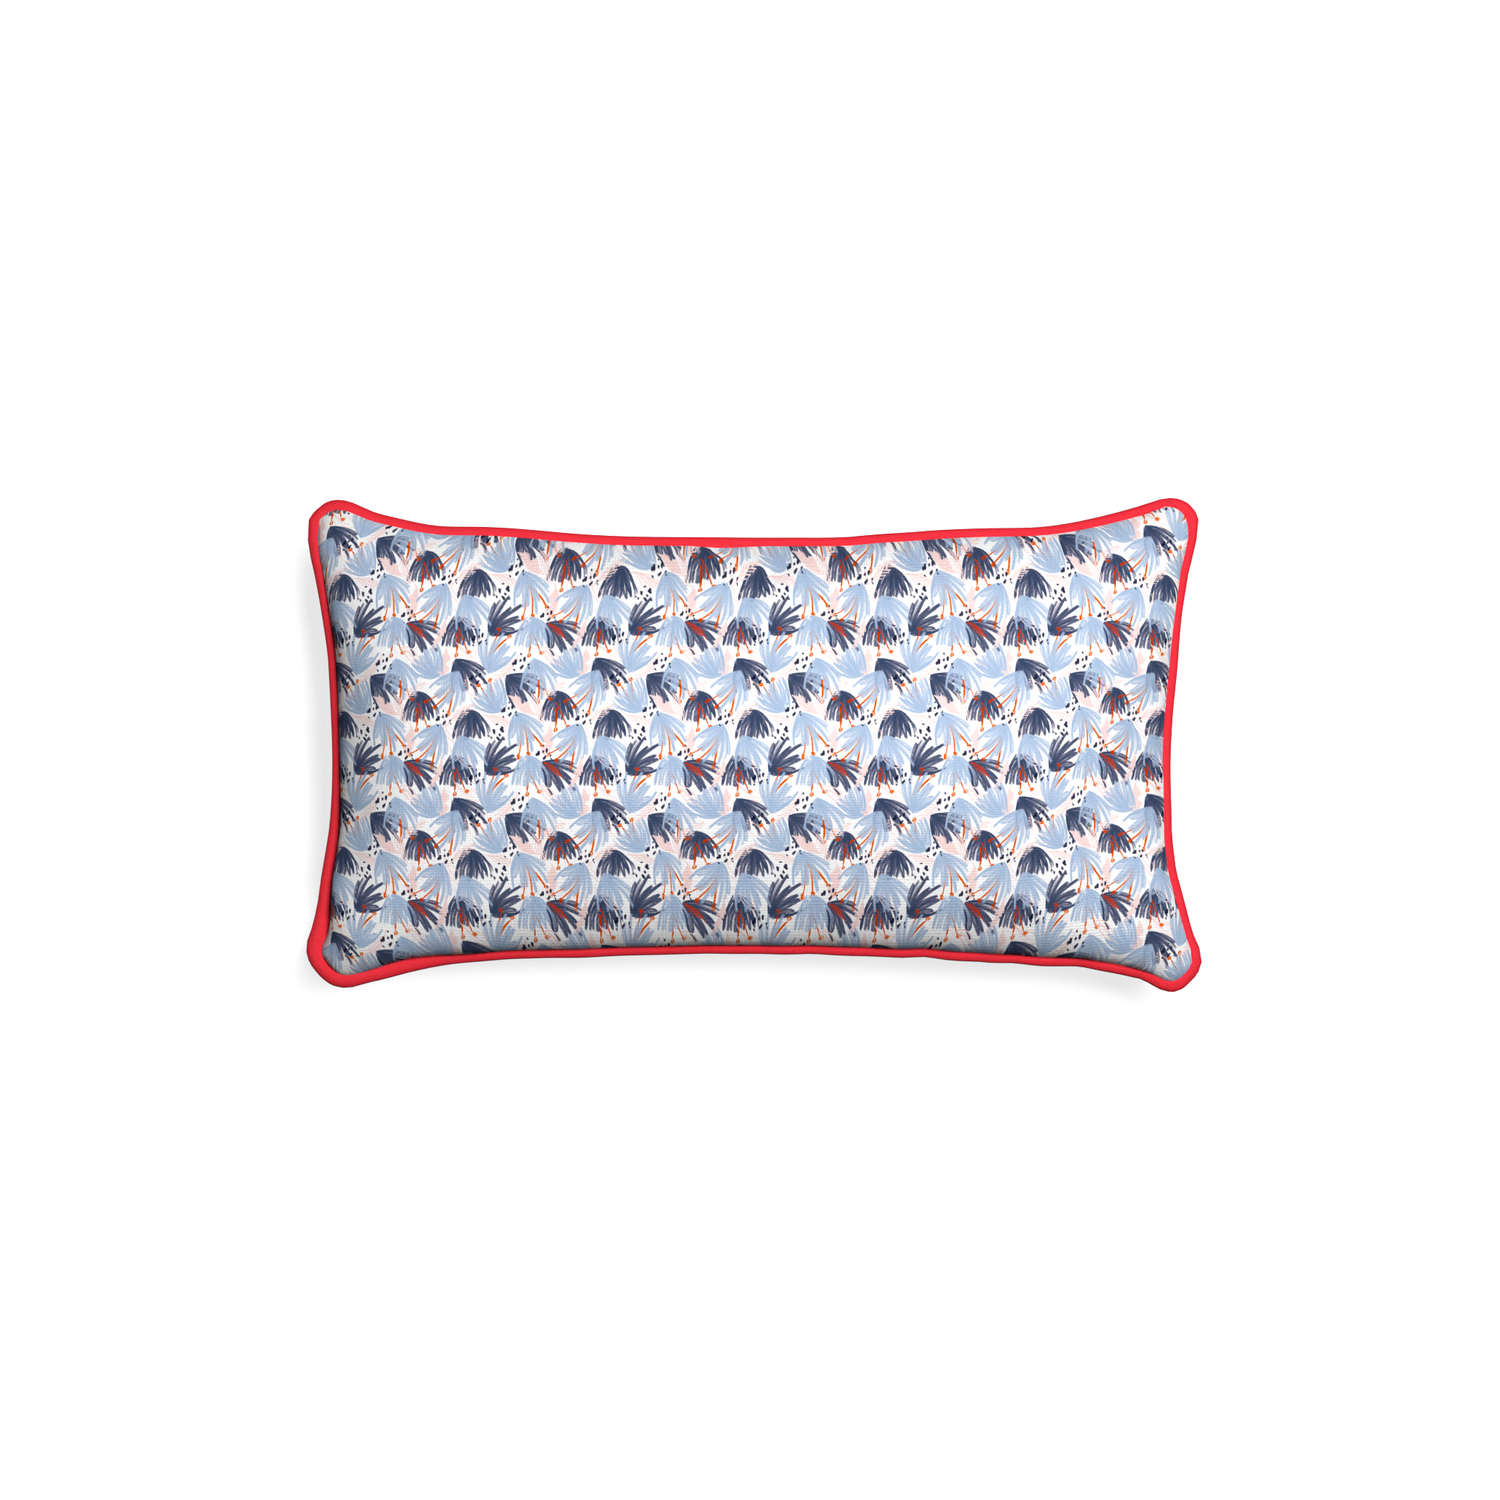 Petite-lumbar eden blue custom red and bluepillow with cherry piping on white background